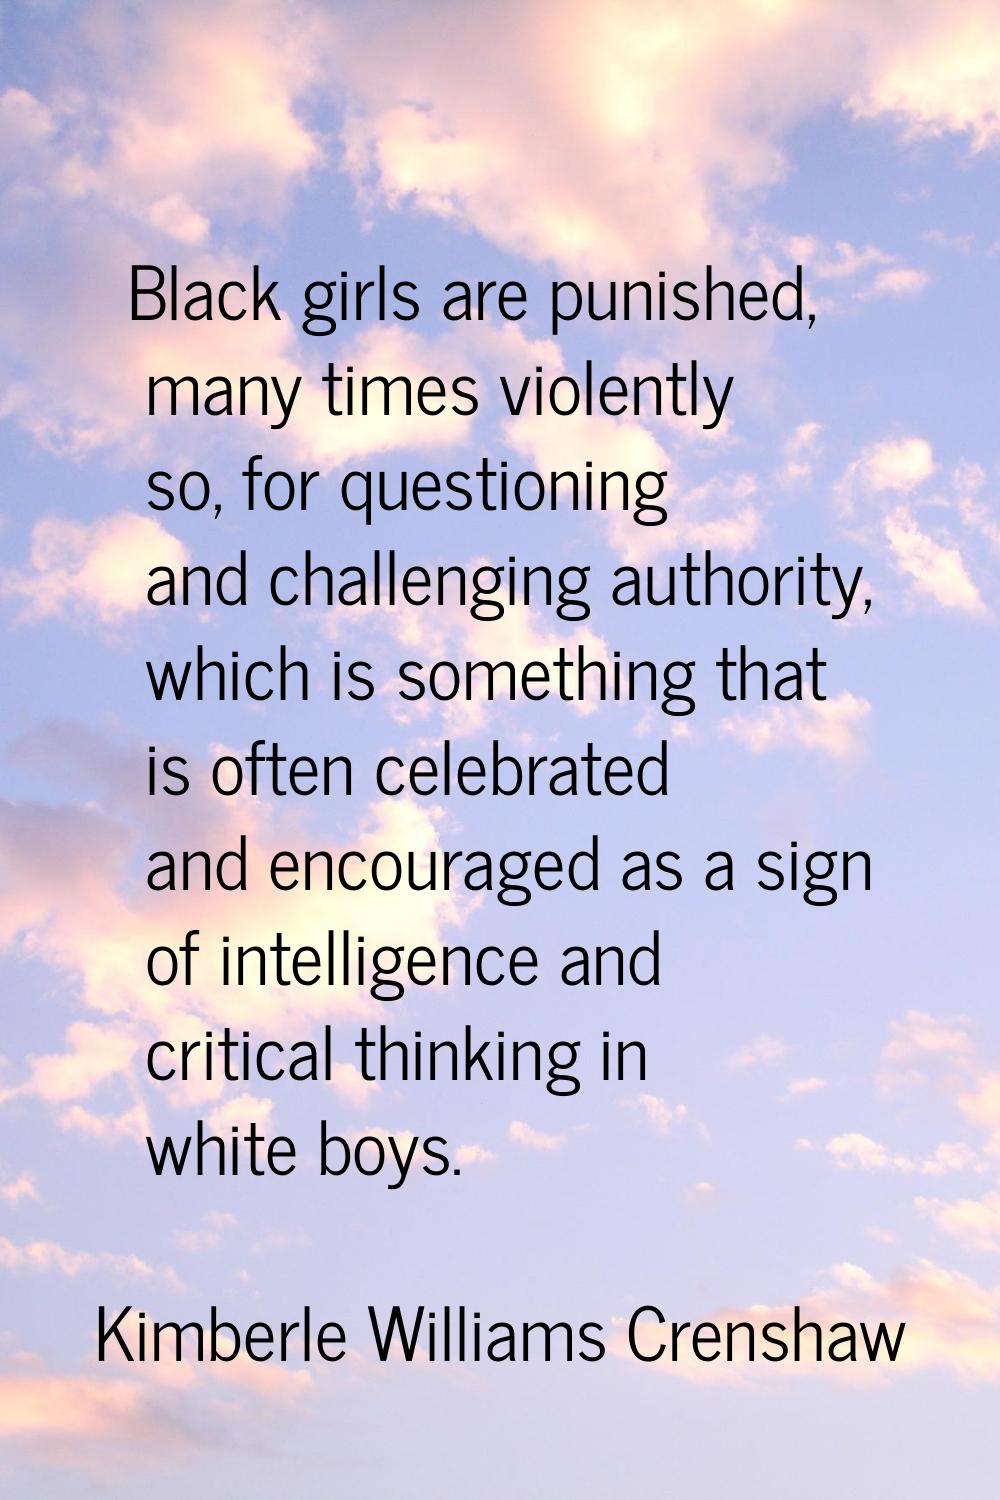 Black girls are punished, many times violently so, for questioning and challenging authority, which